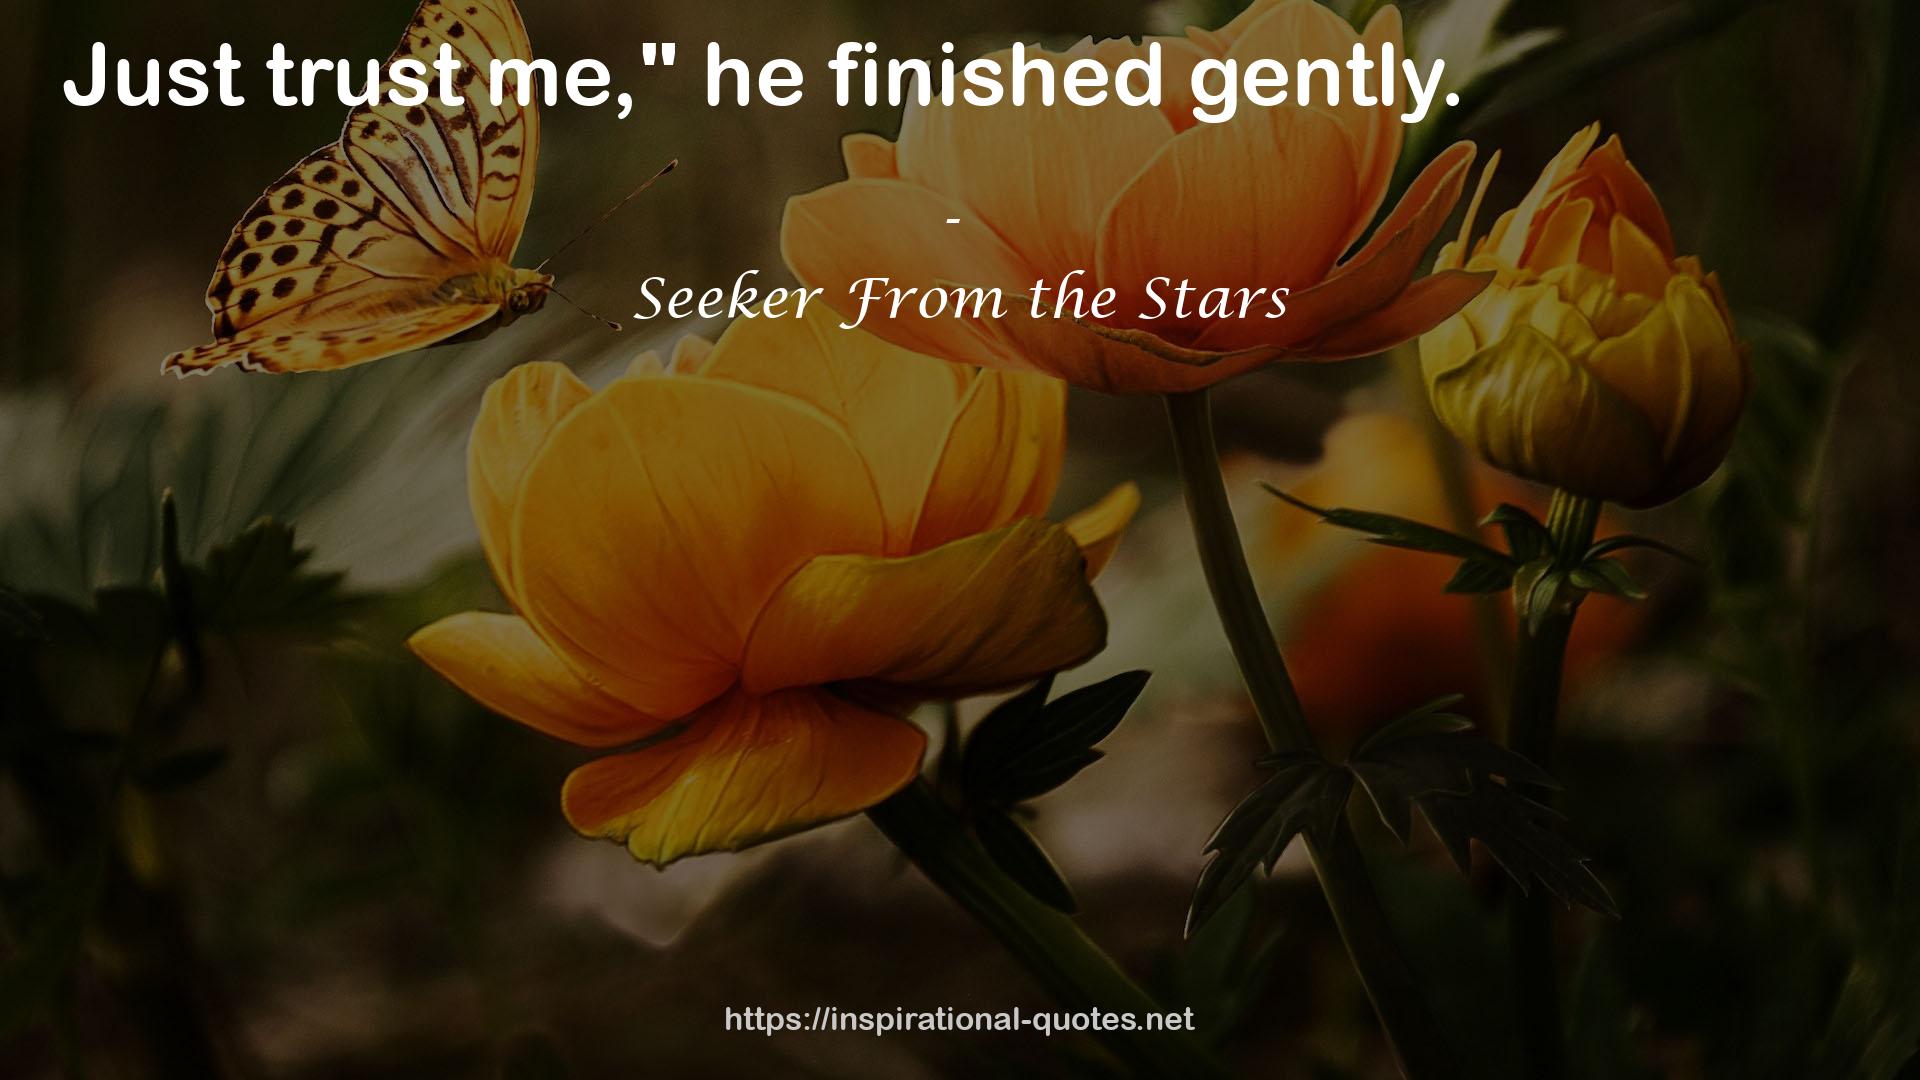 Seeker From the Stars QUOTES